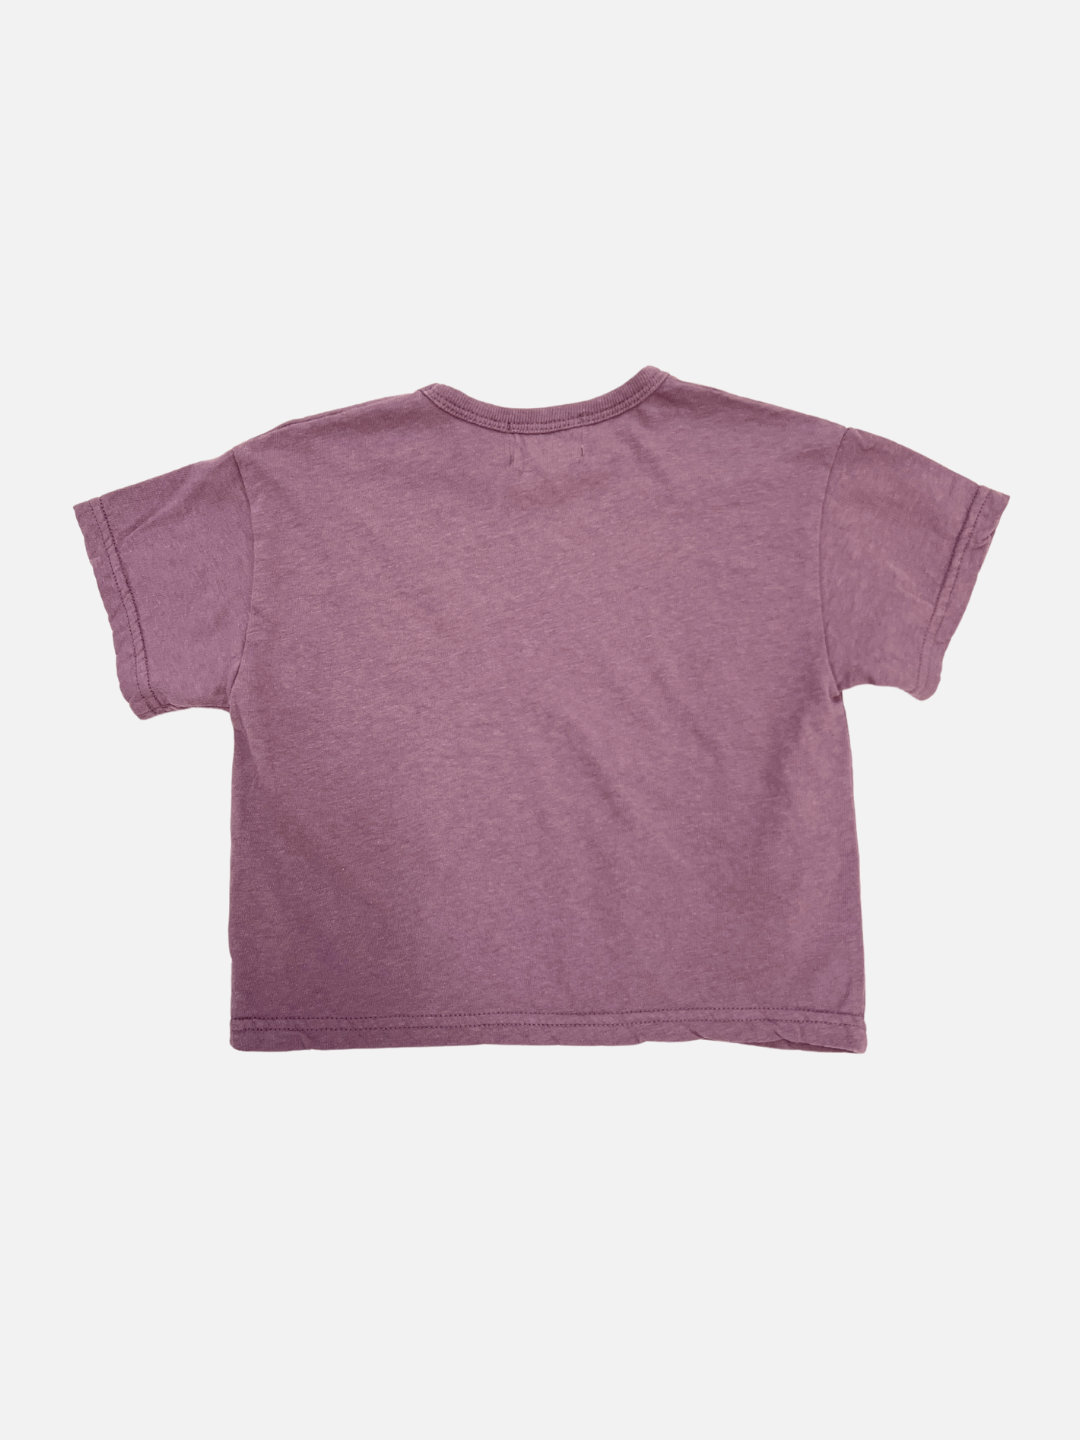 Back view of the kid's Studio tee in mauve